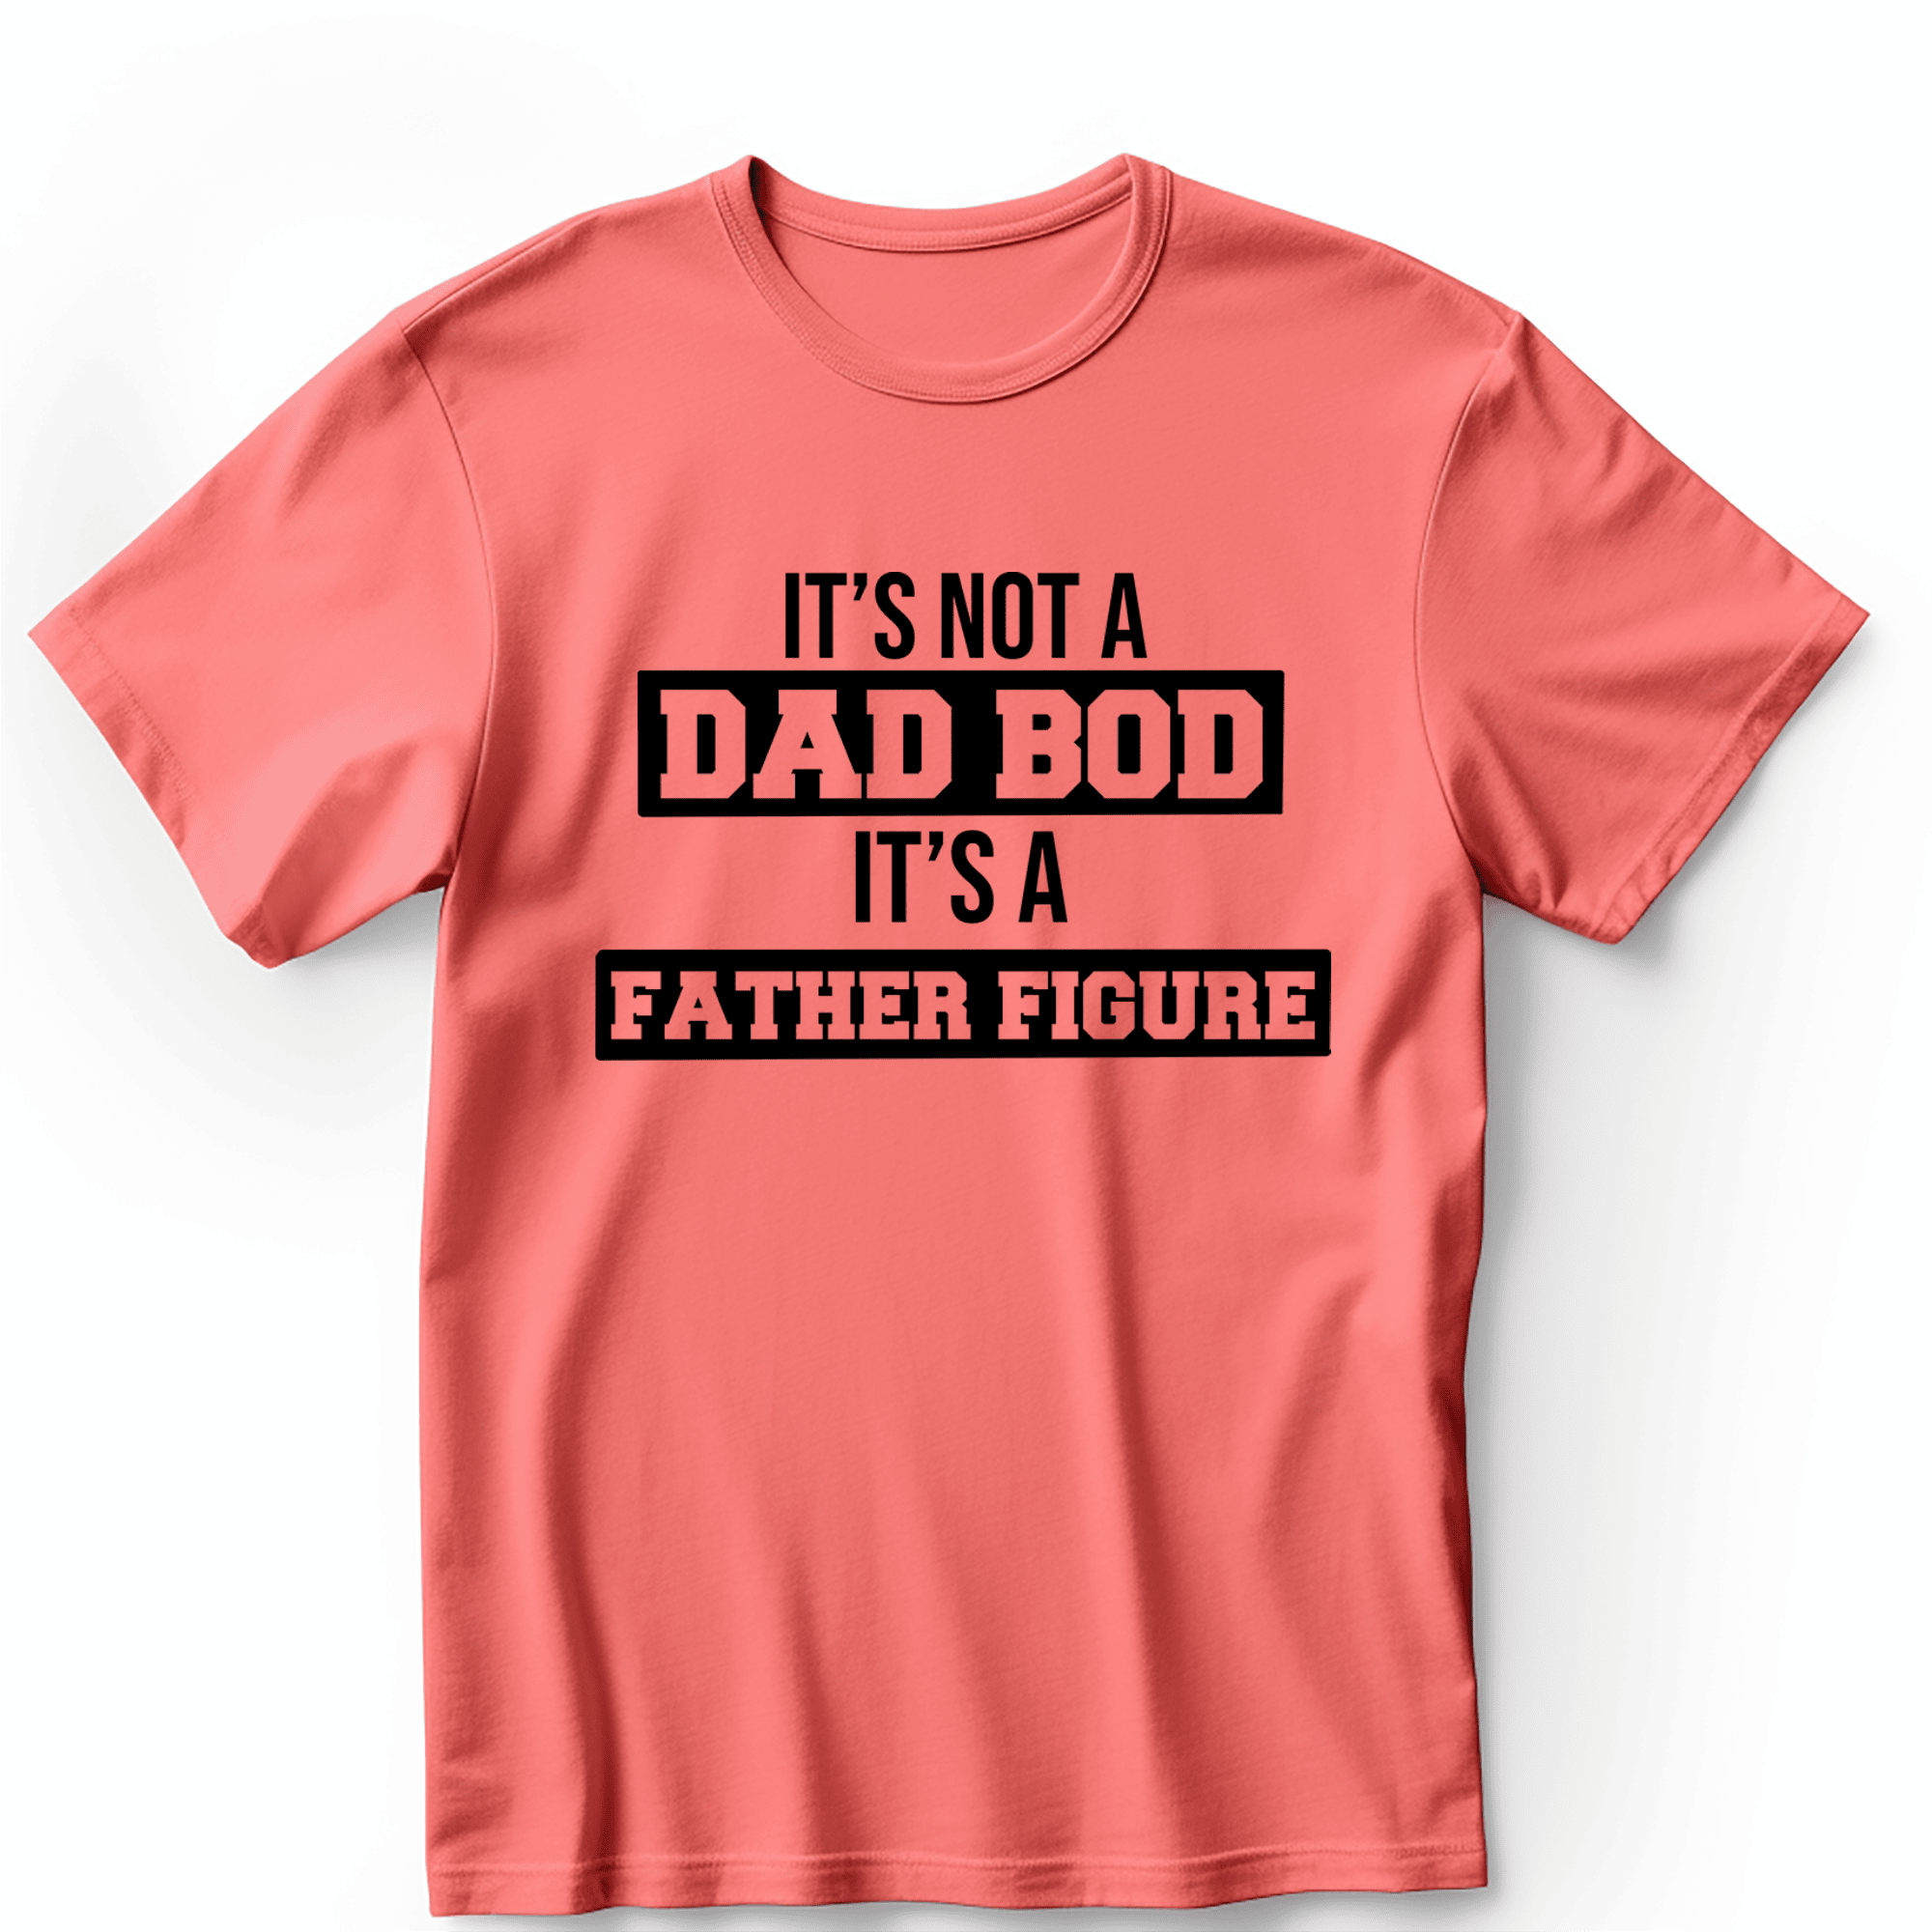 Light Red Mens T-Shirt With Dad Bod Father Figure Design